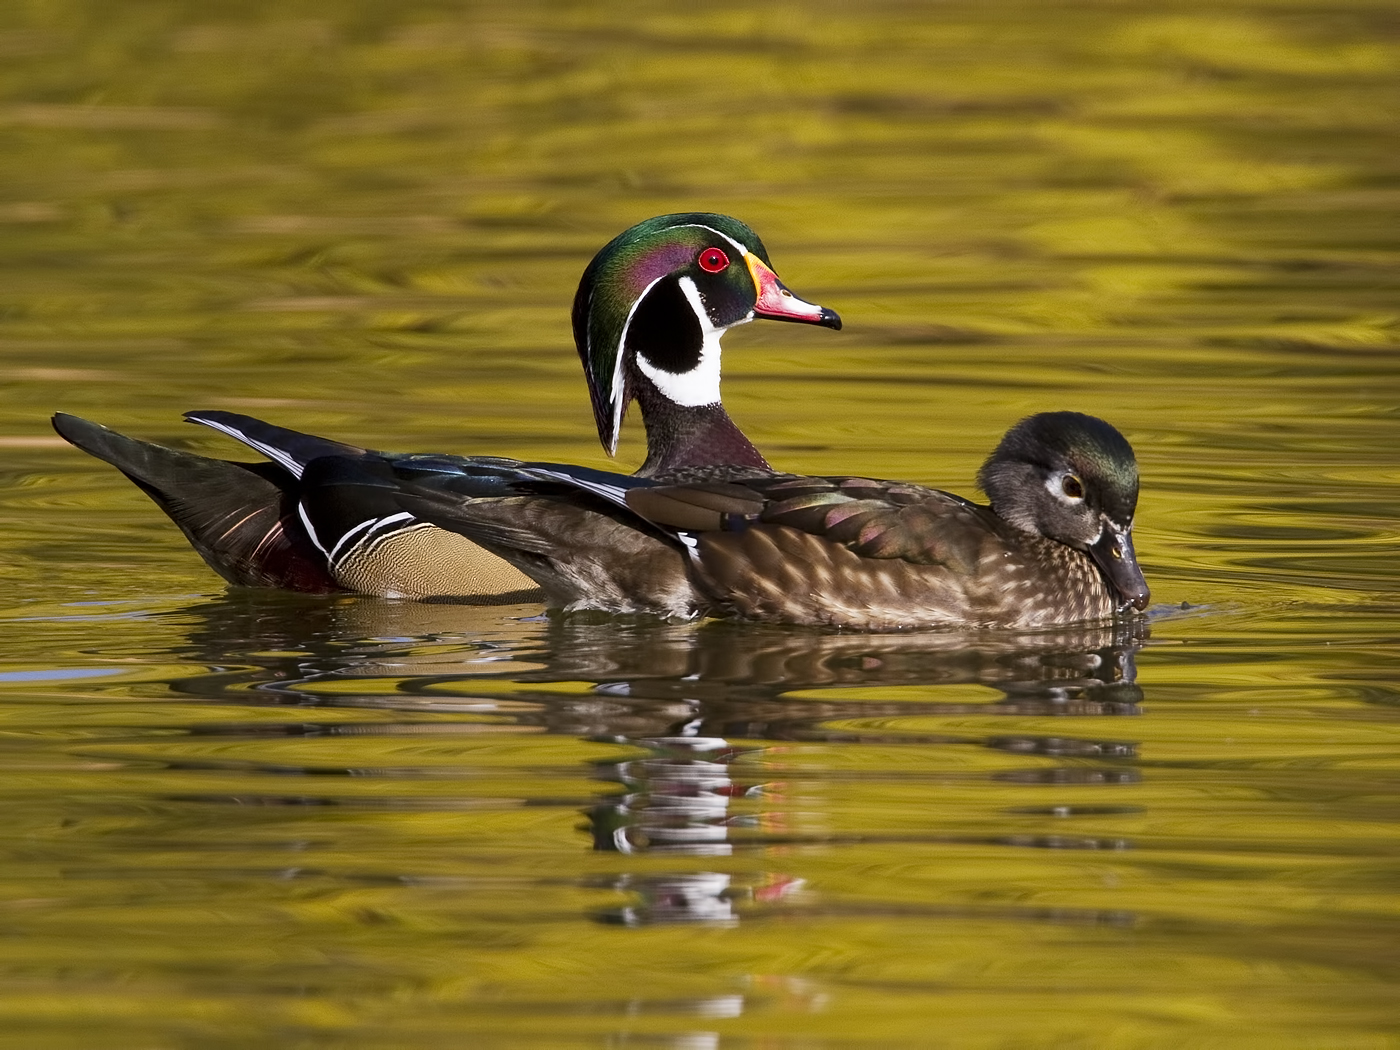 A beautiful pair of wood ducks swimming in open water